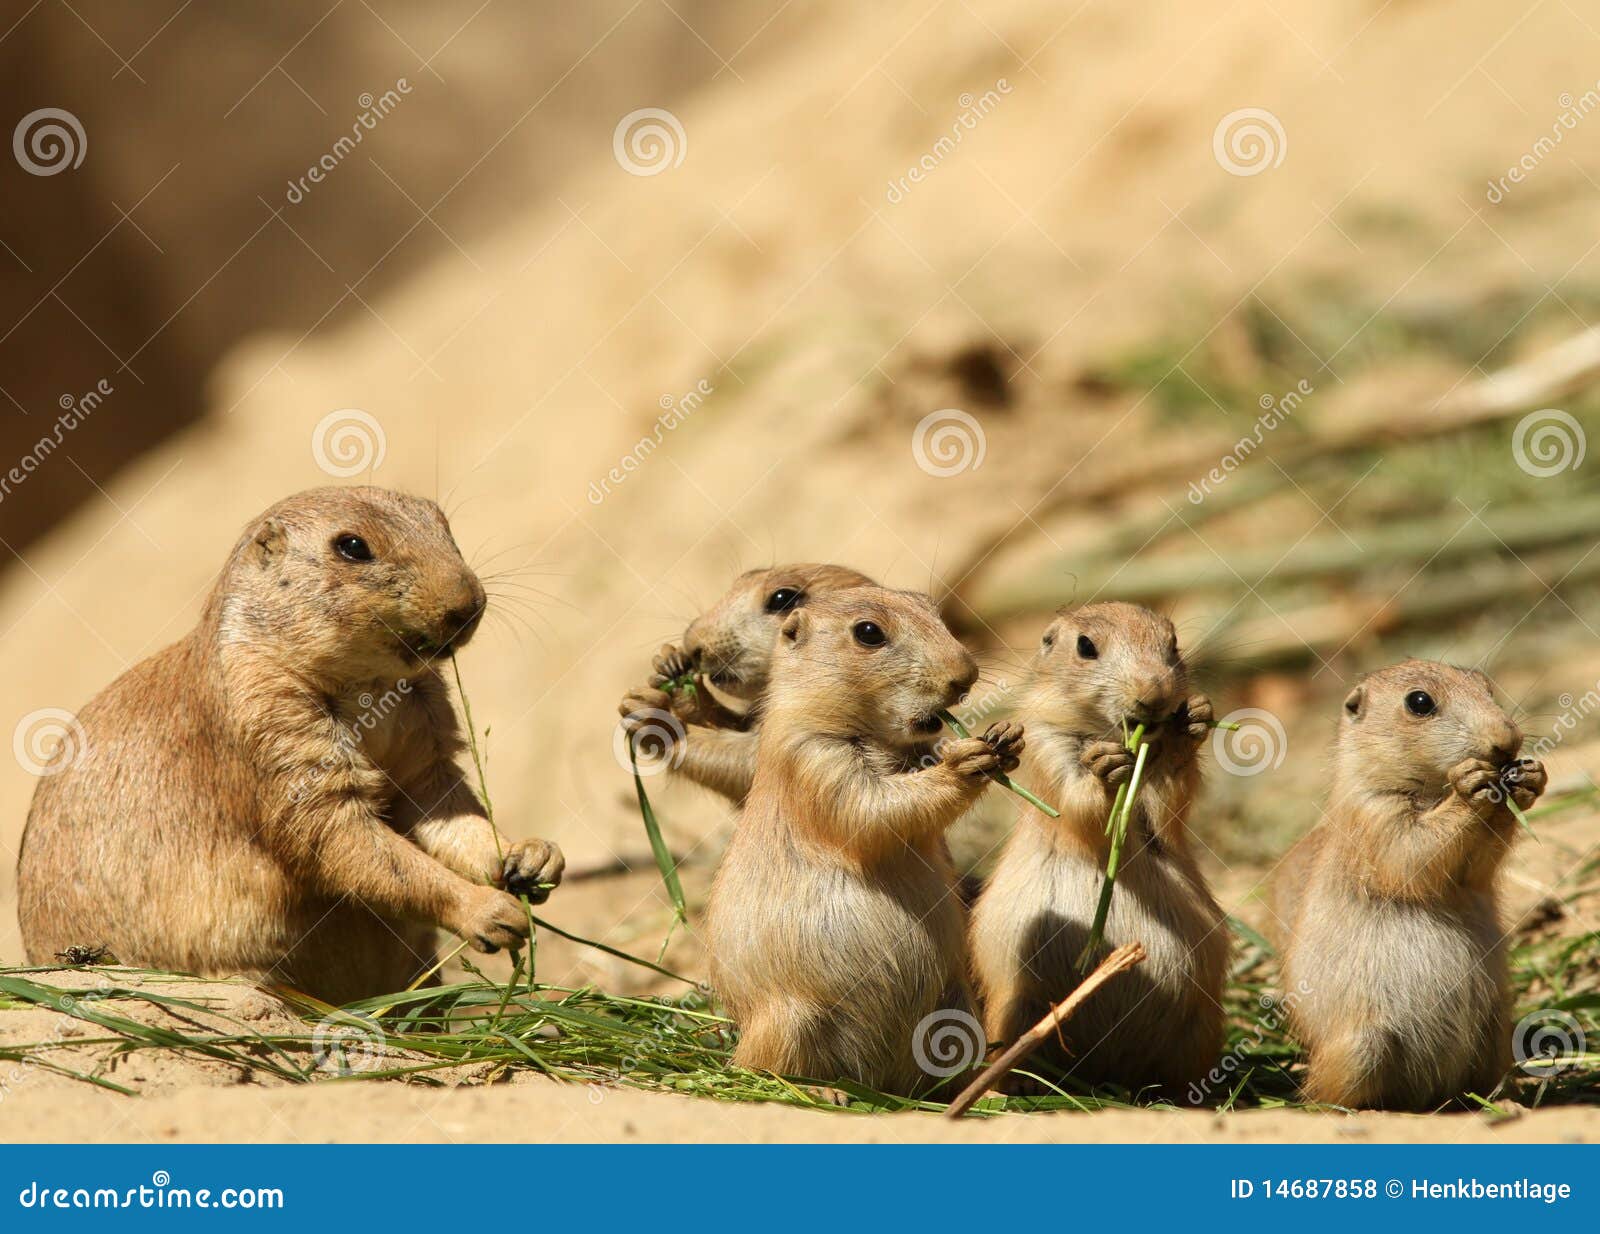 group of baby prairie dogs eating